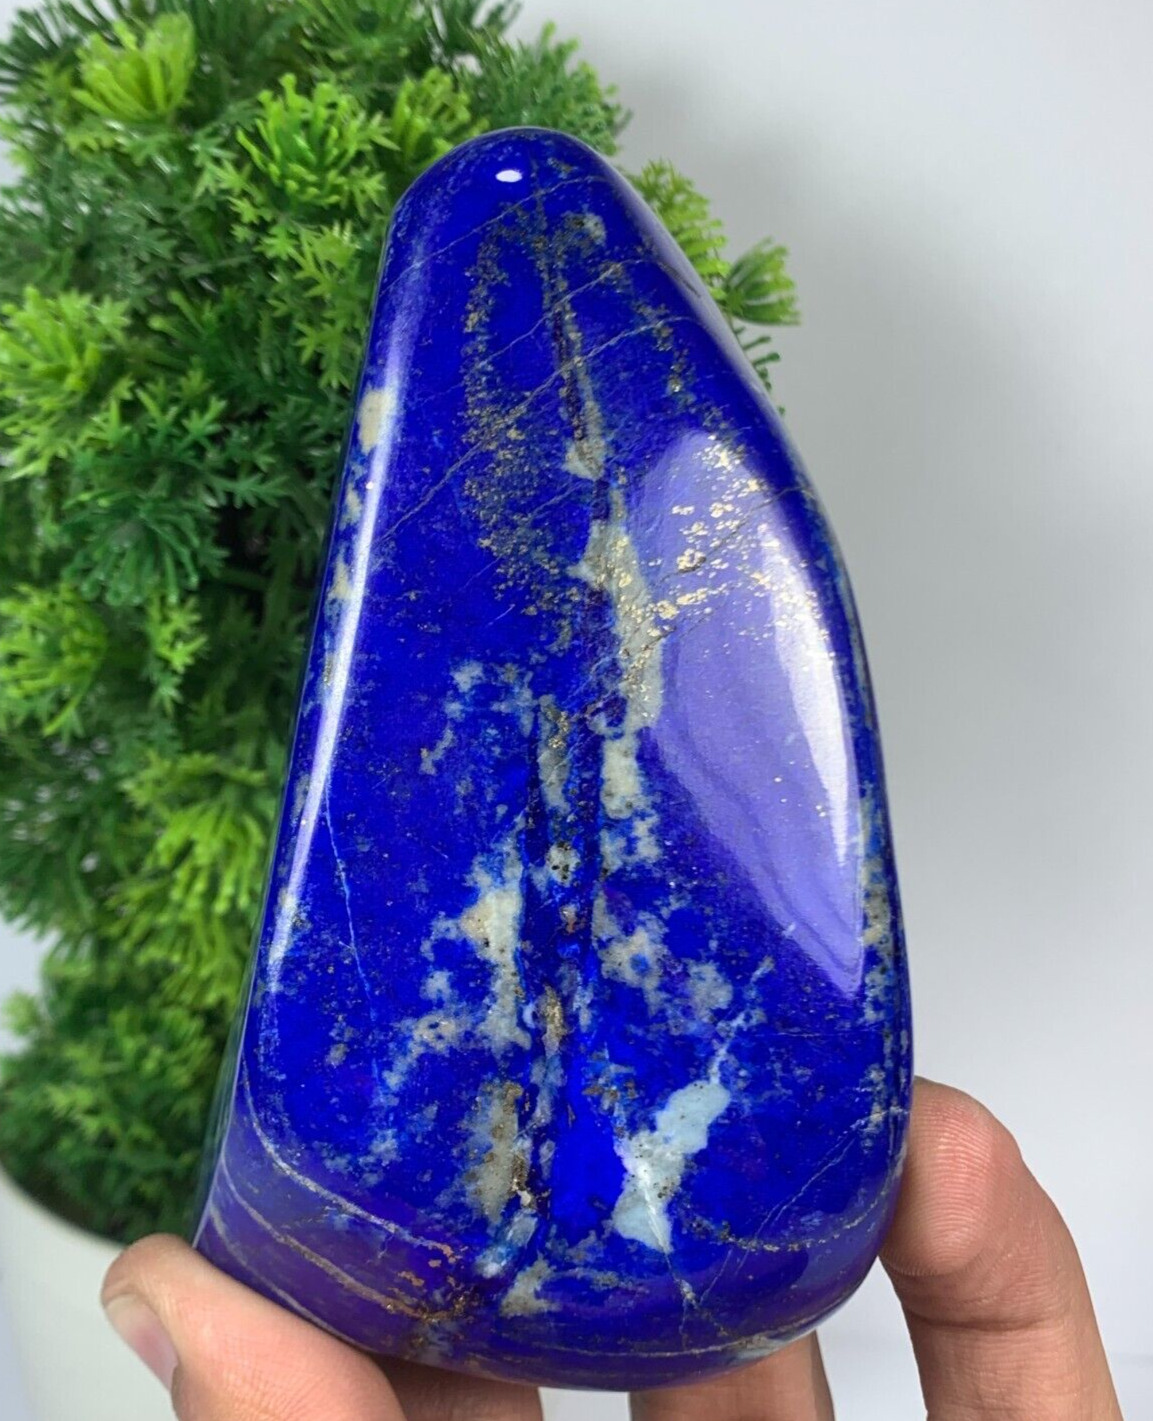 329Gram Lapis Lazuli Freeform Rough AAA+ Grade Tumbled Polished From Afghanistan